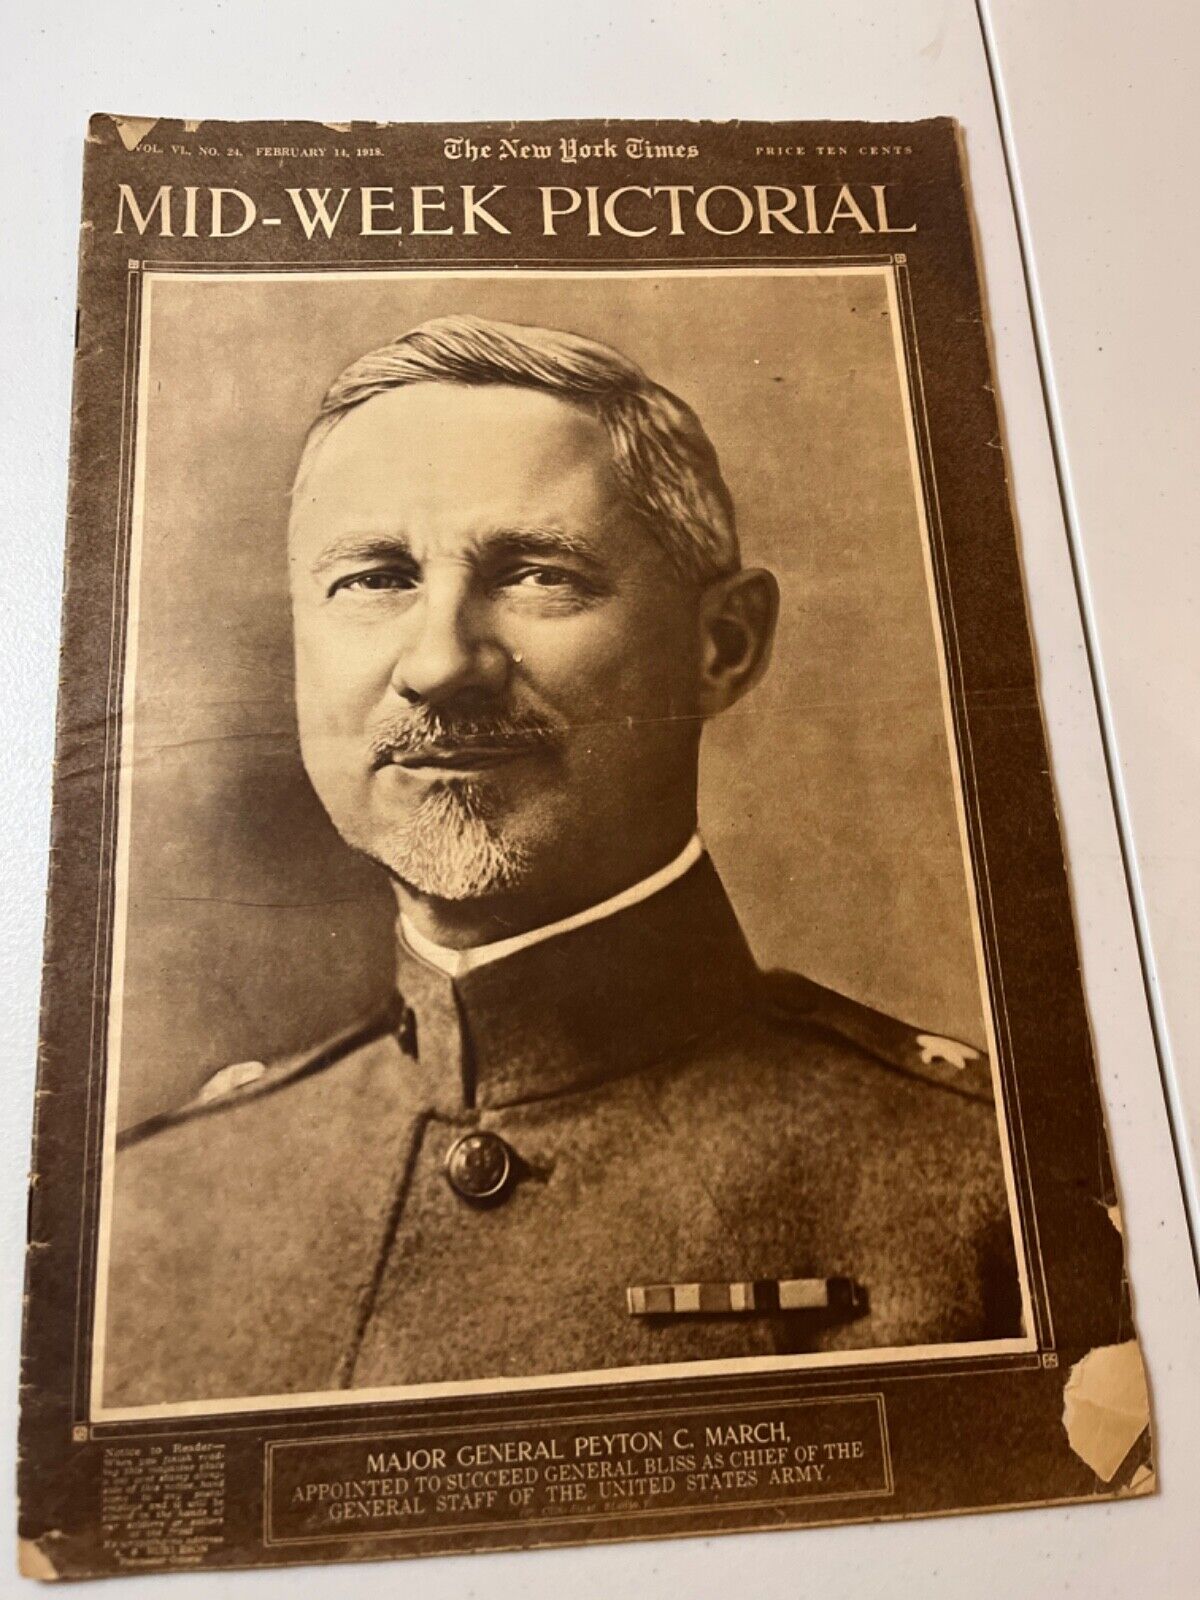 February 14, 1918 Midweek Pictorial New York Times-General Peyton C. March